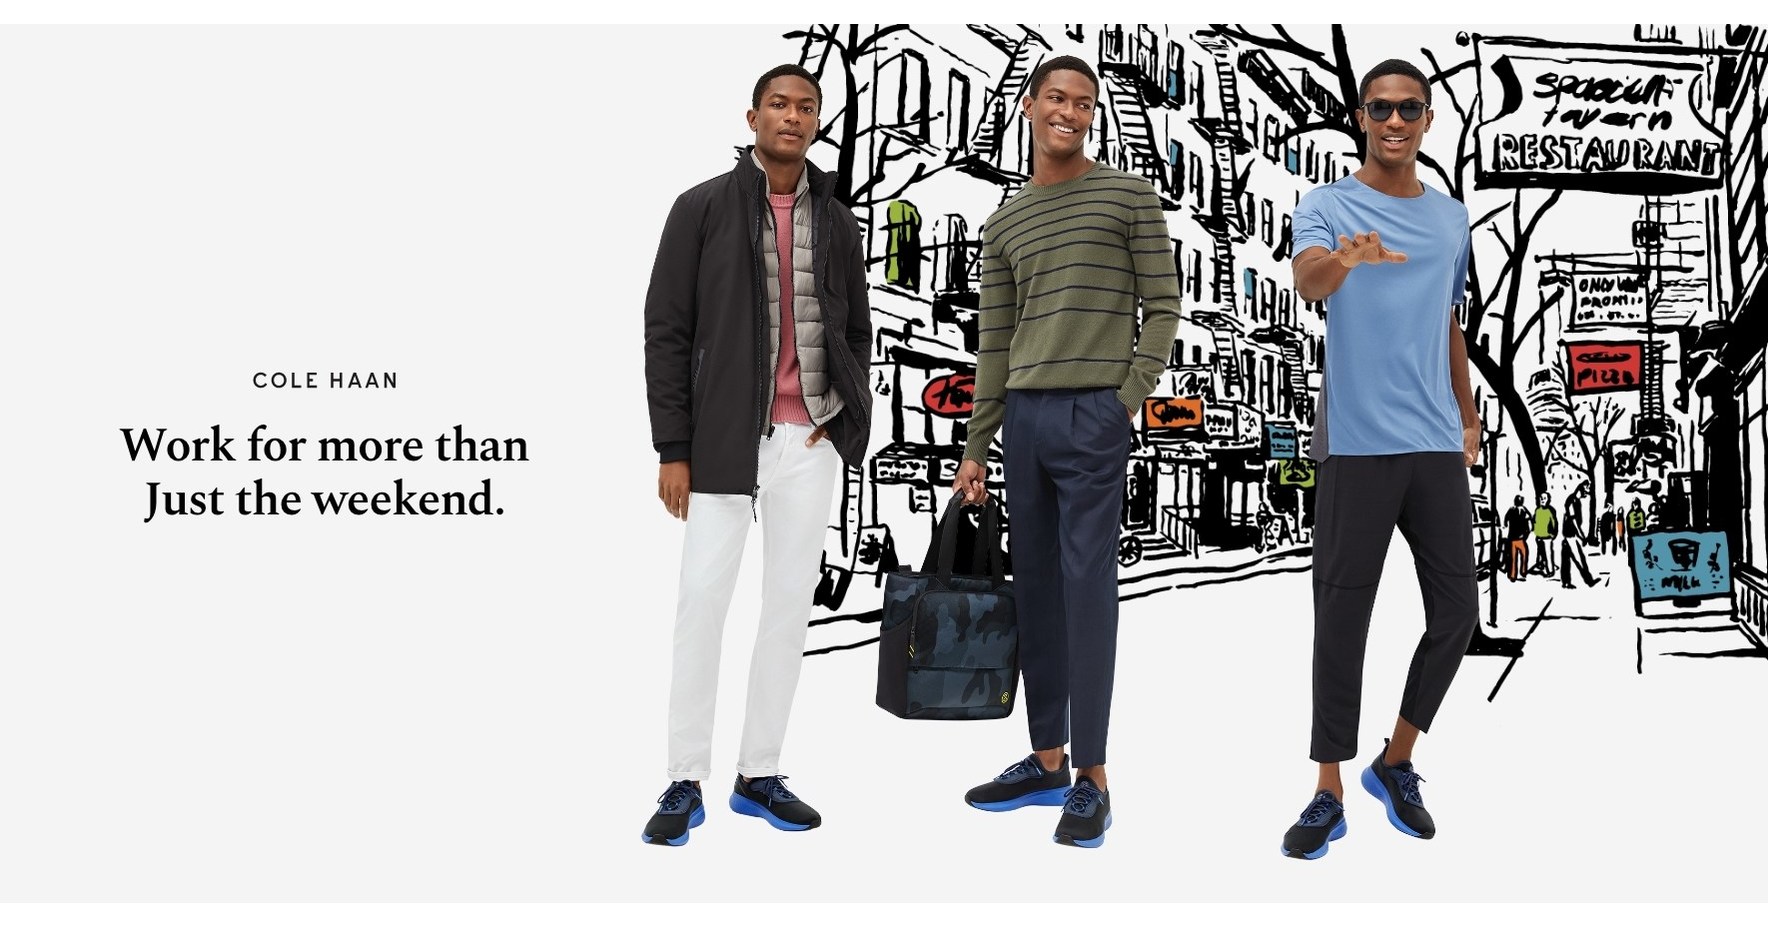 COLE HAAN REIMAGINES TRADITION WITH ITS NEW SPRING CAMPAIGN